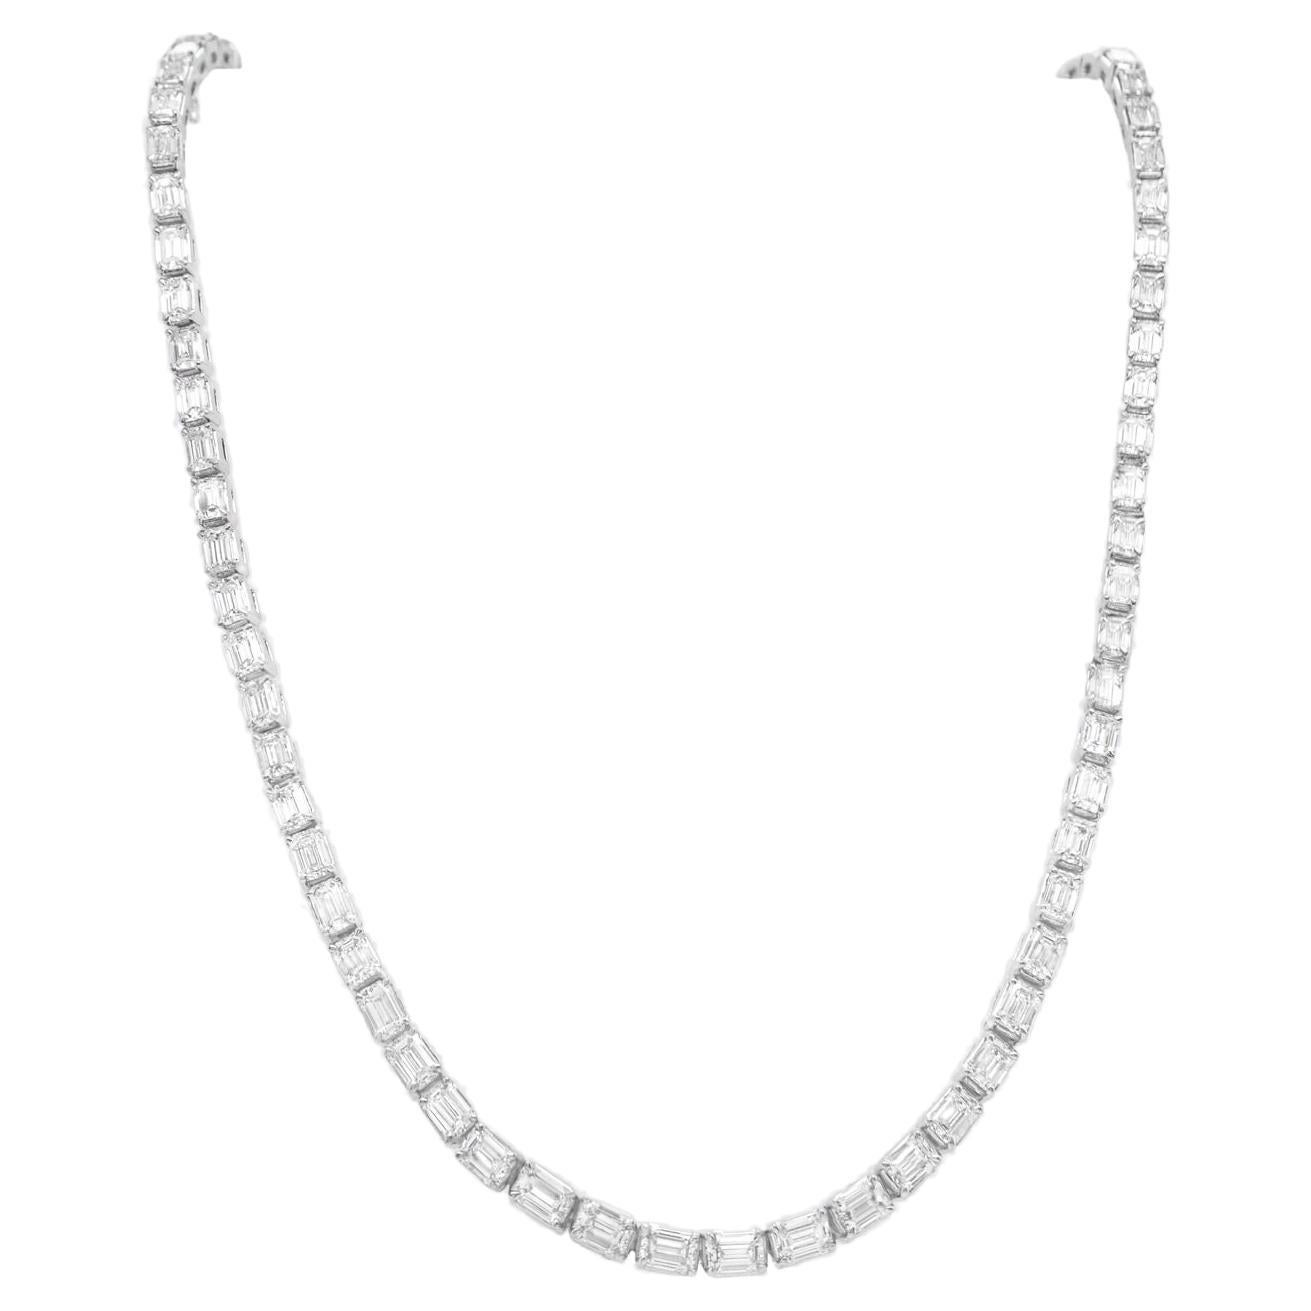 Emerald Cut Diamond 13.50 Carats Total Front Eternity Necklace